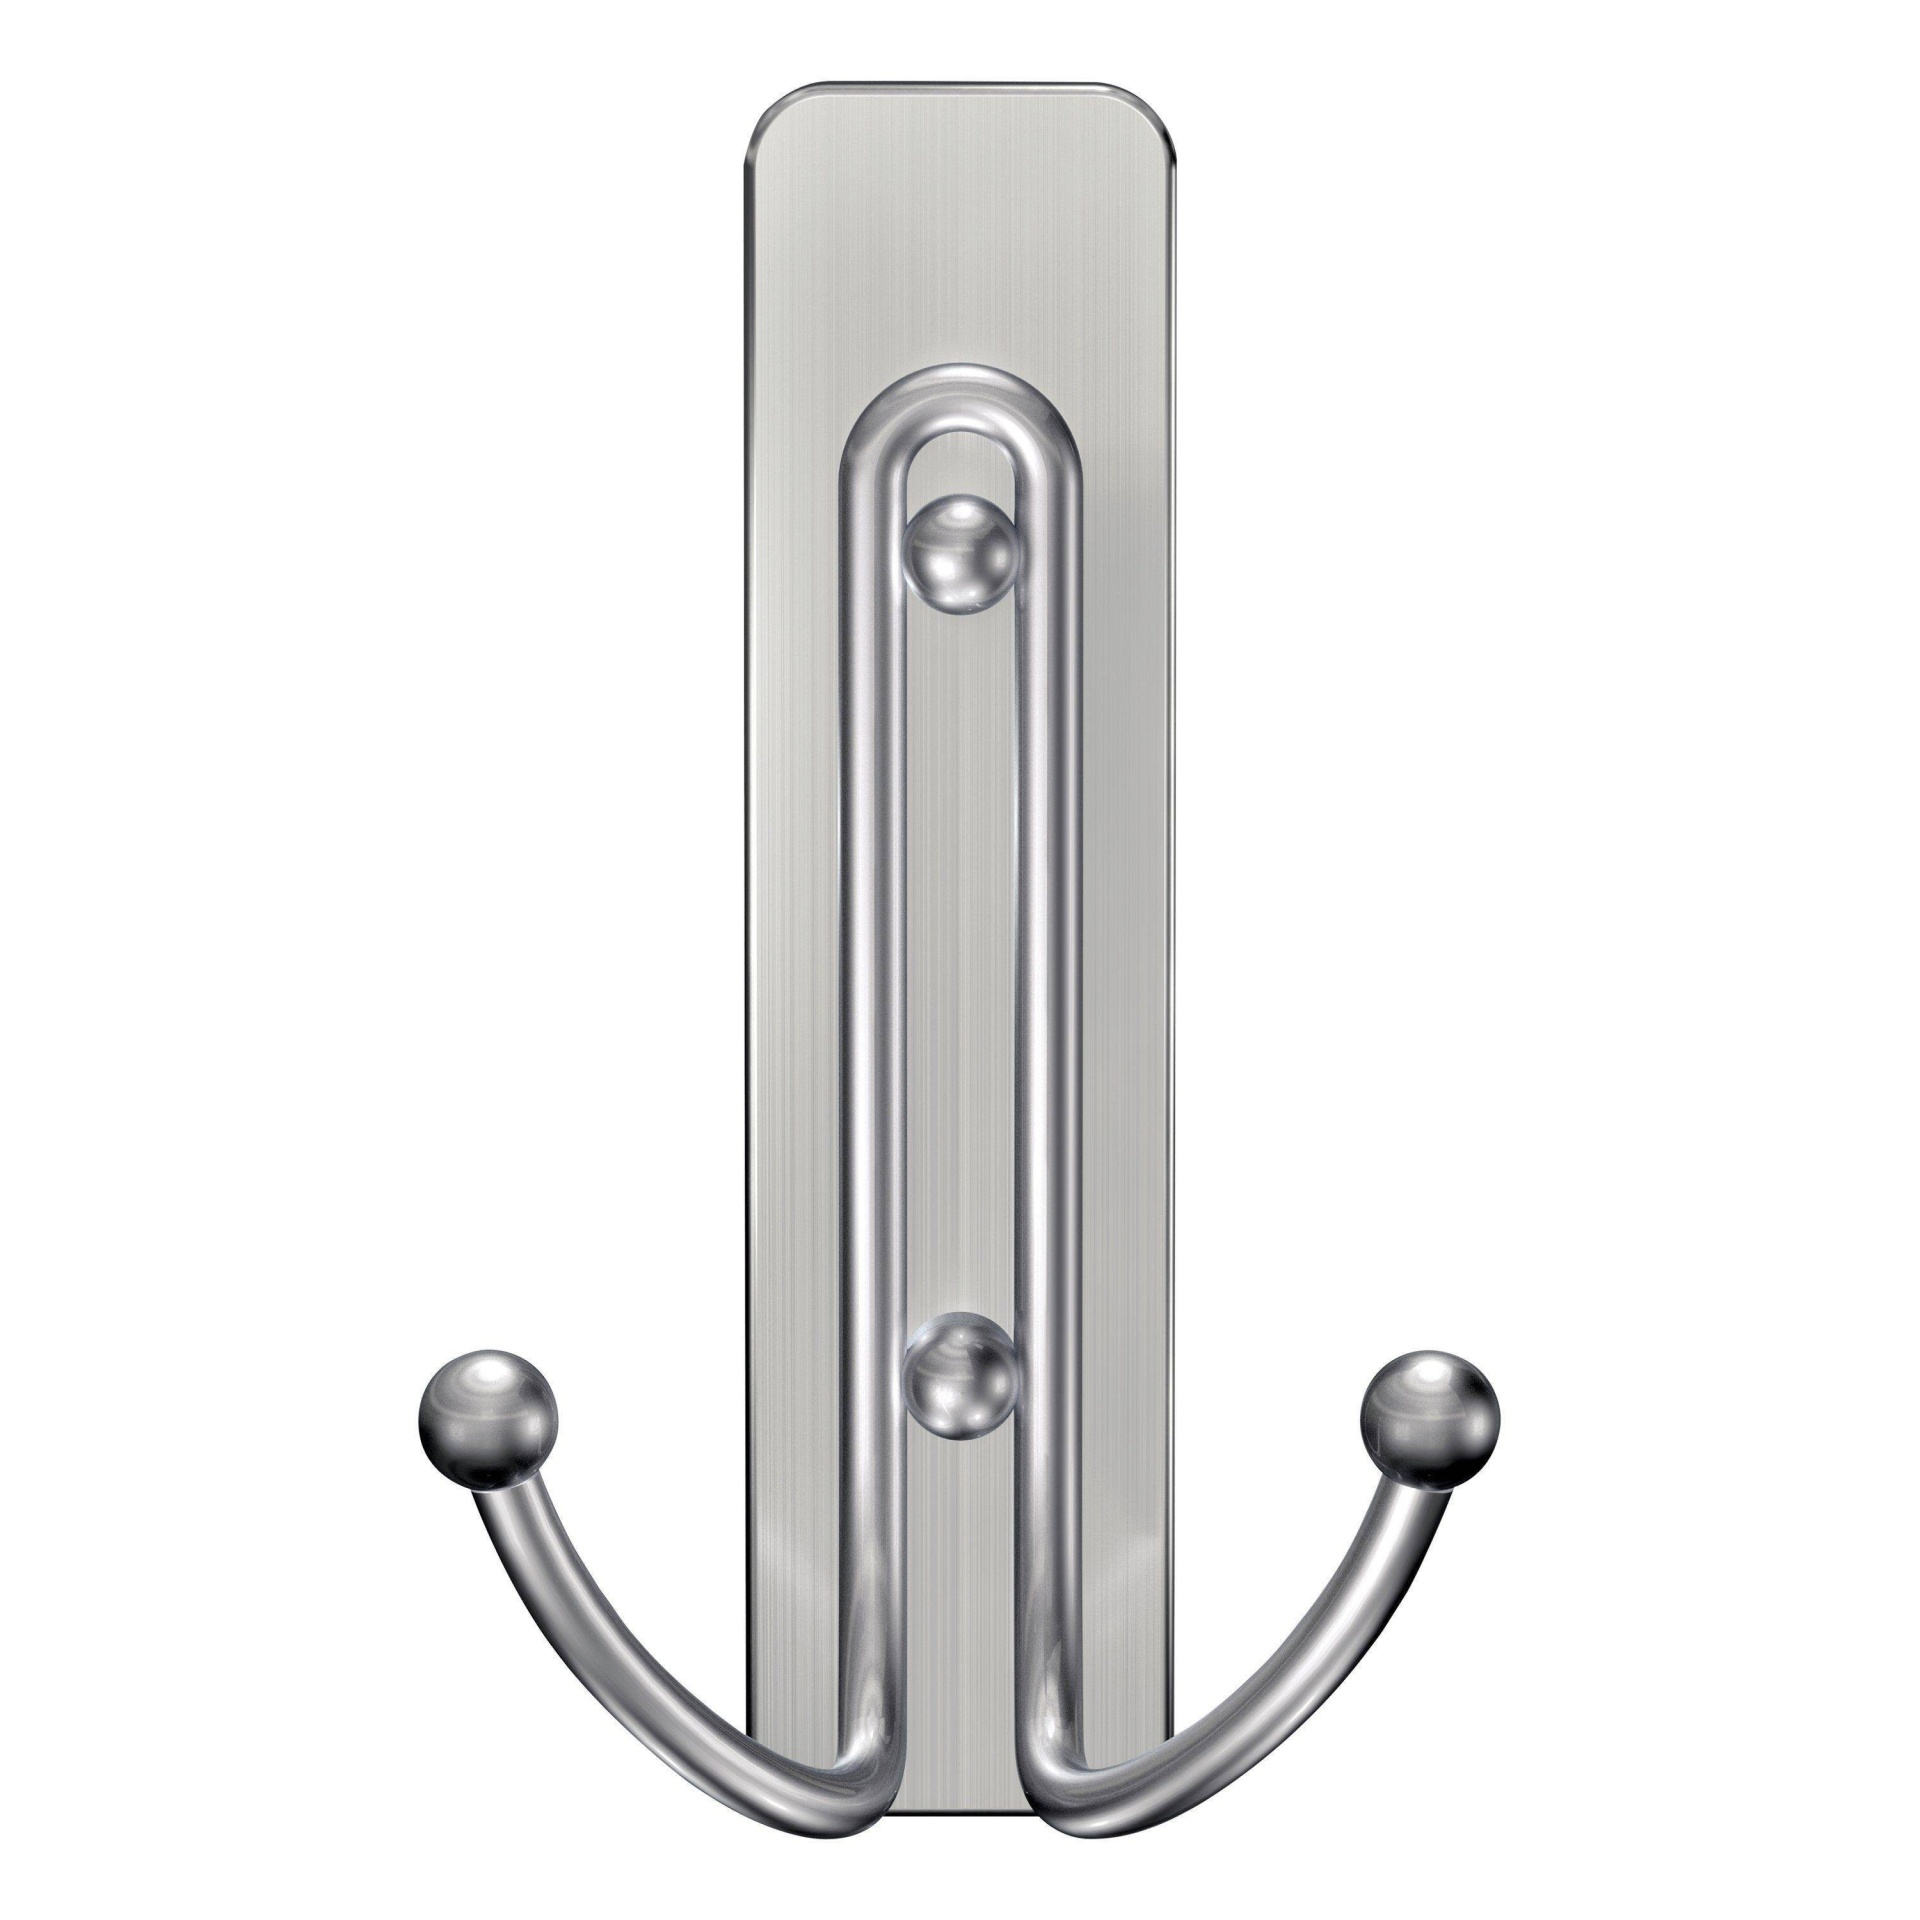 slide 1 of 4, 3M Command Bath Large Double Hook Satin Nickel, 4.03 in x 2.35 in x 1.68 in